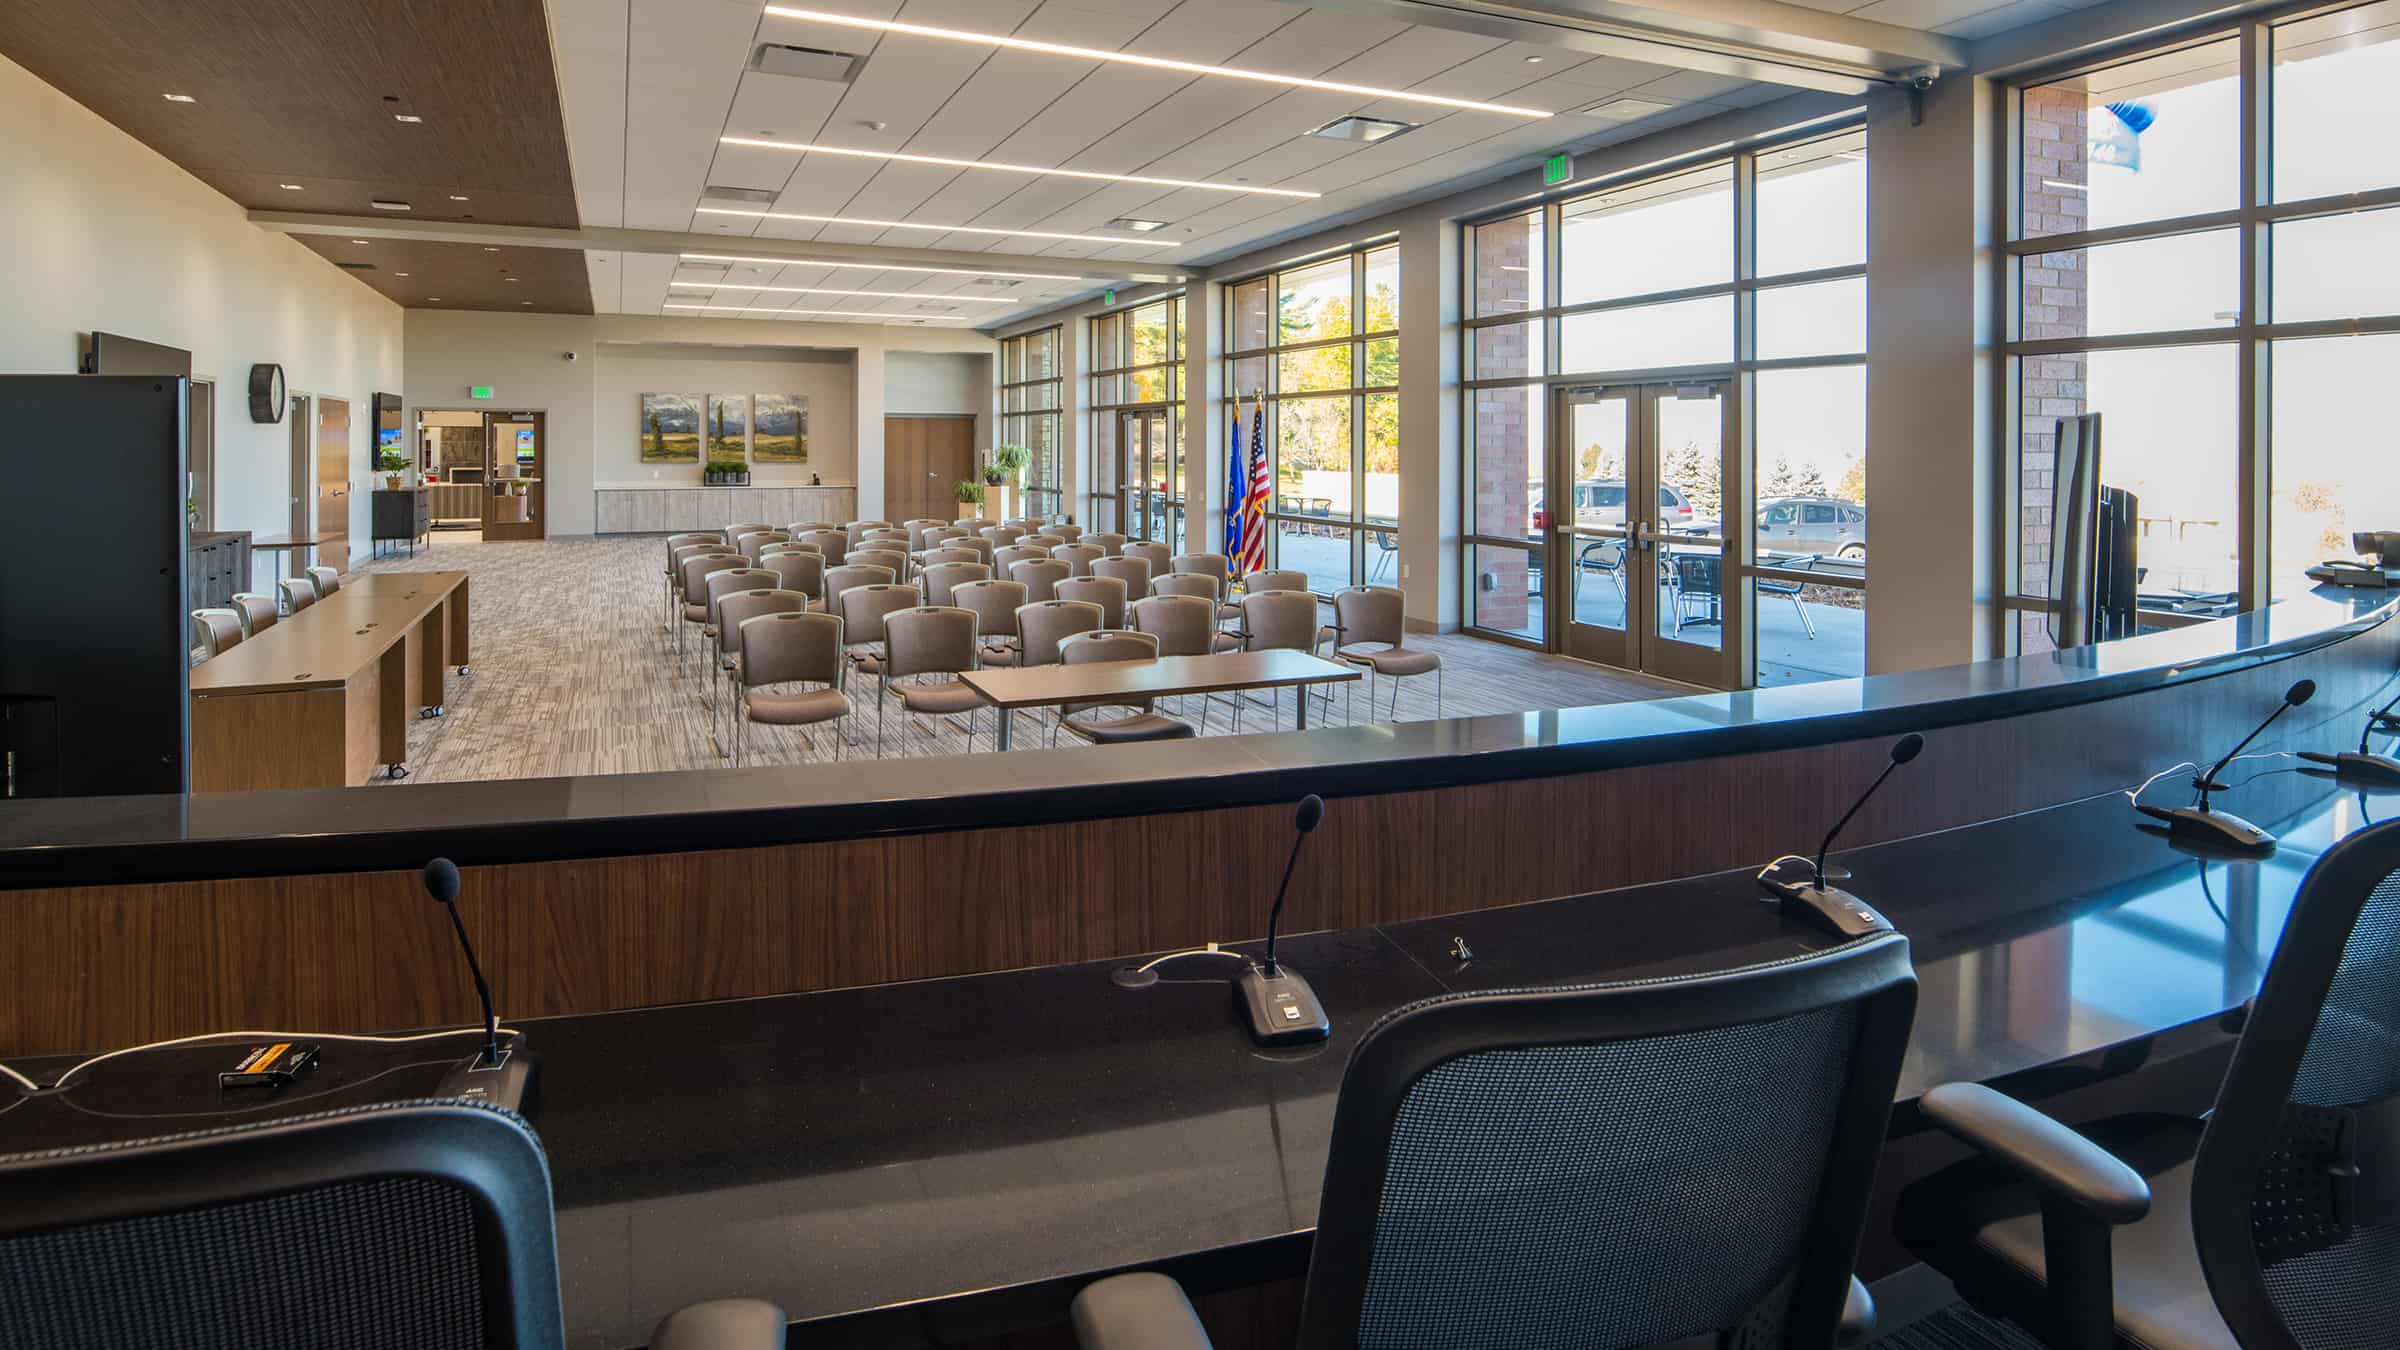 Town of Ledgeview Municipal Building - Interior View of Meeting Chambers with Seating and Outside View